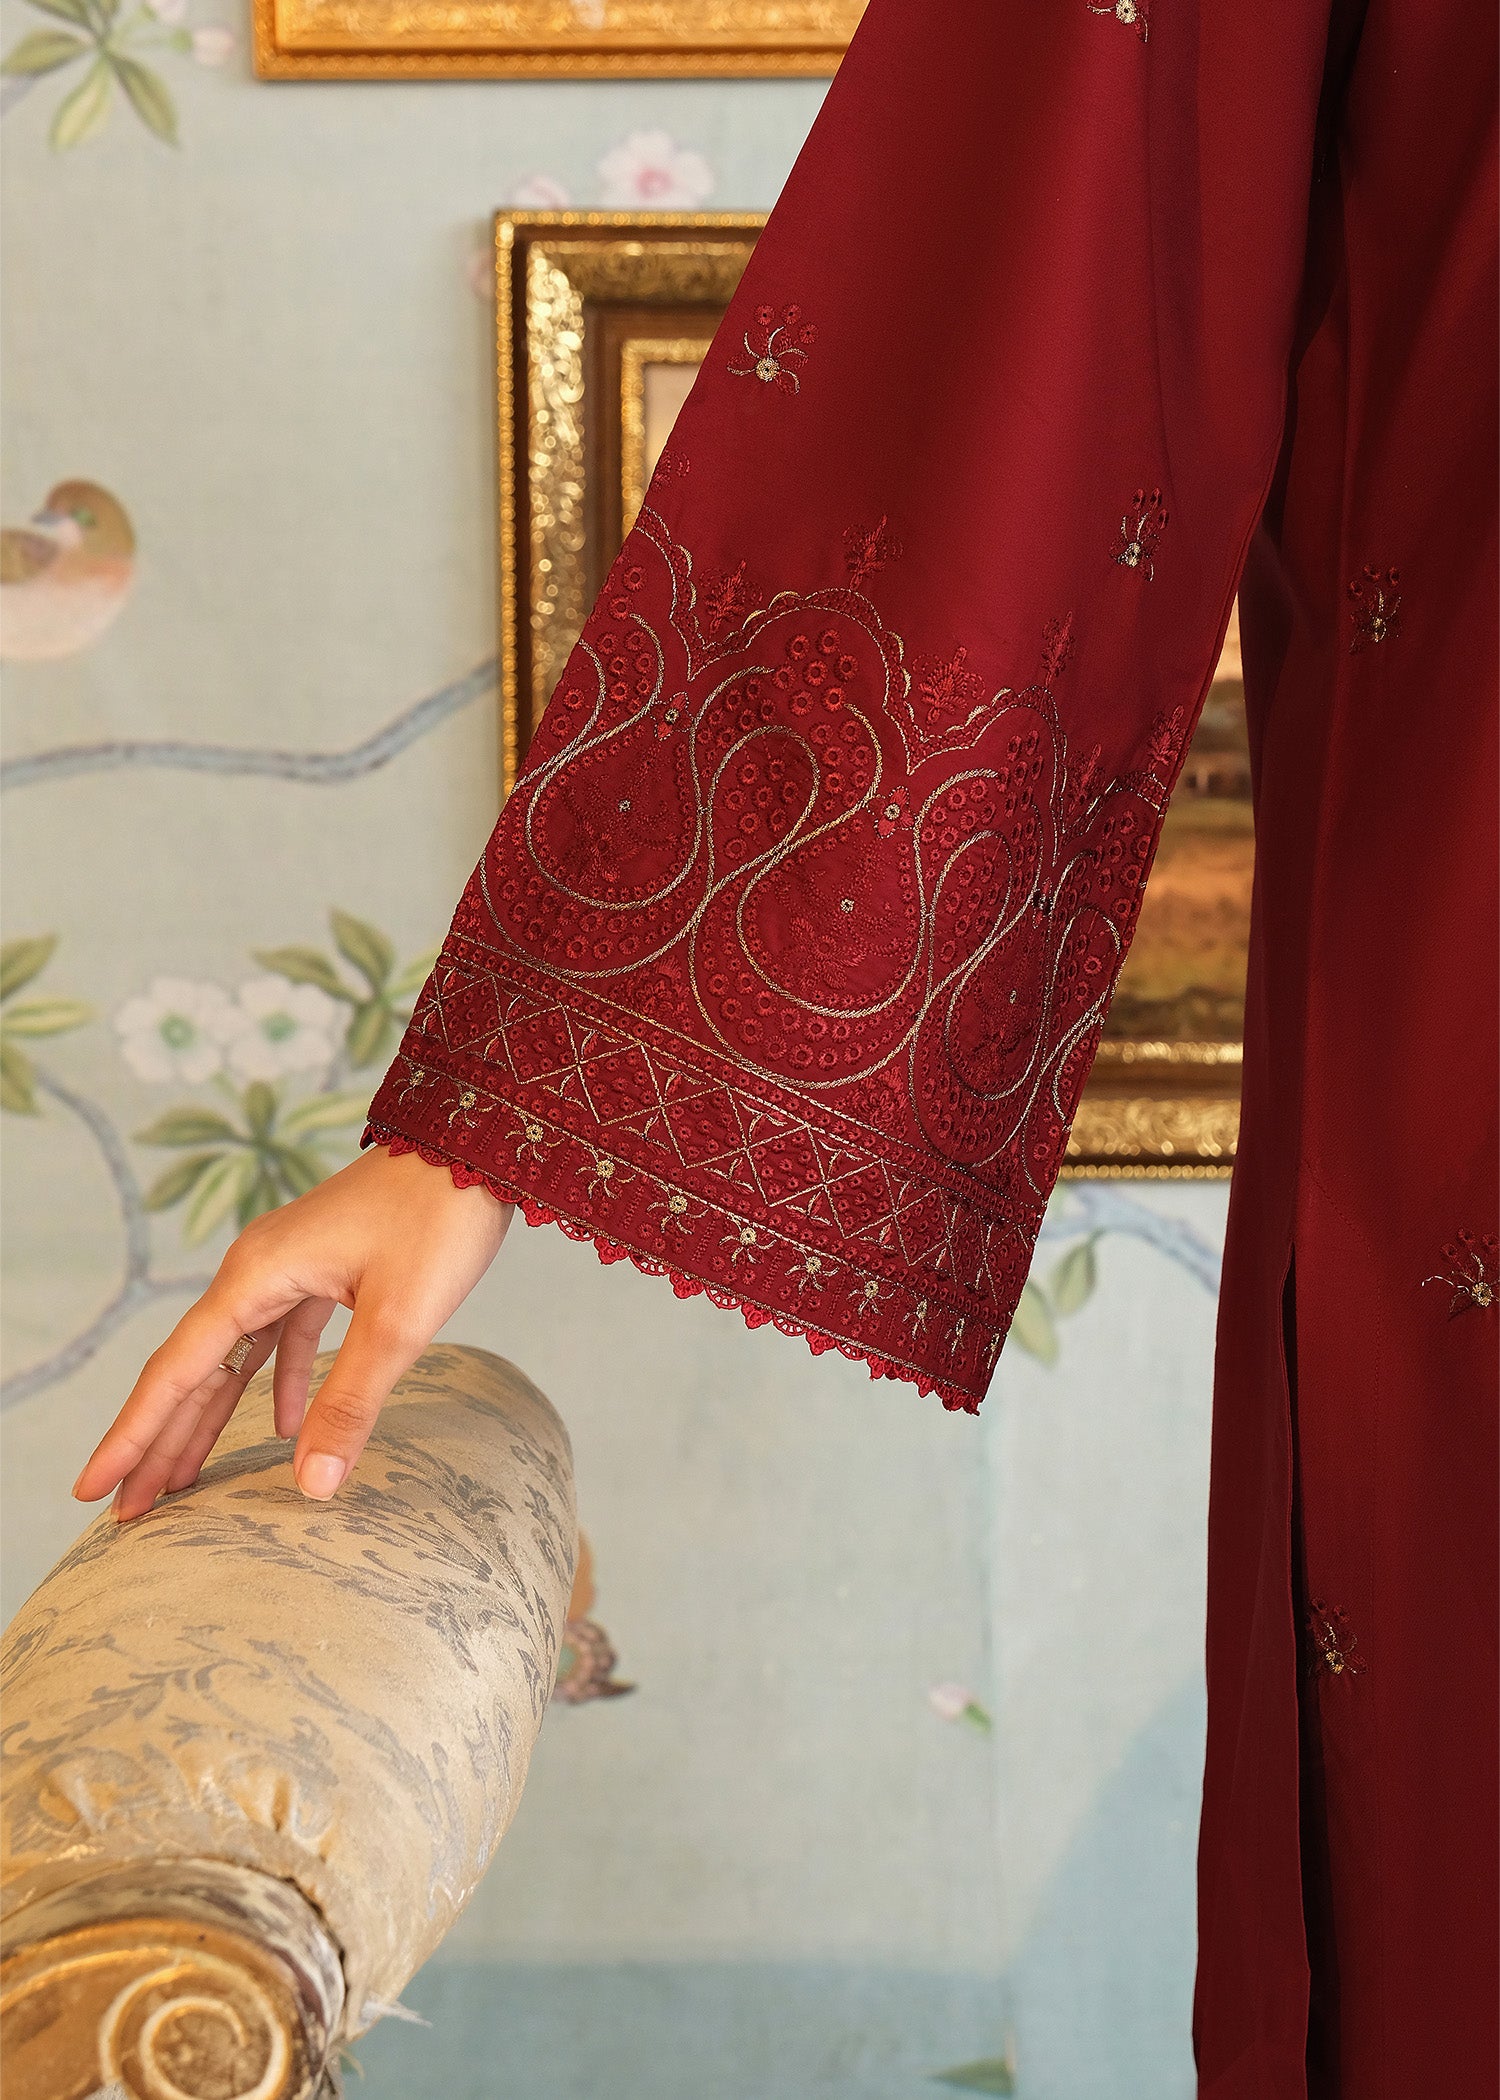 Maroon Suit with Gold Embroidery